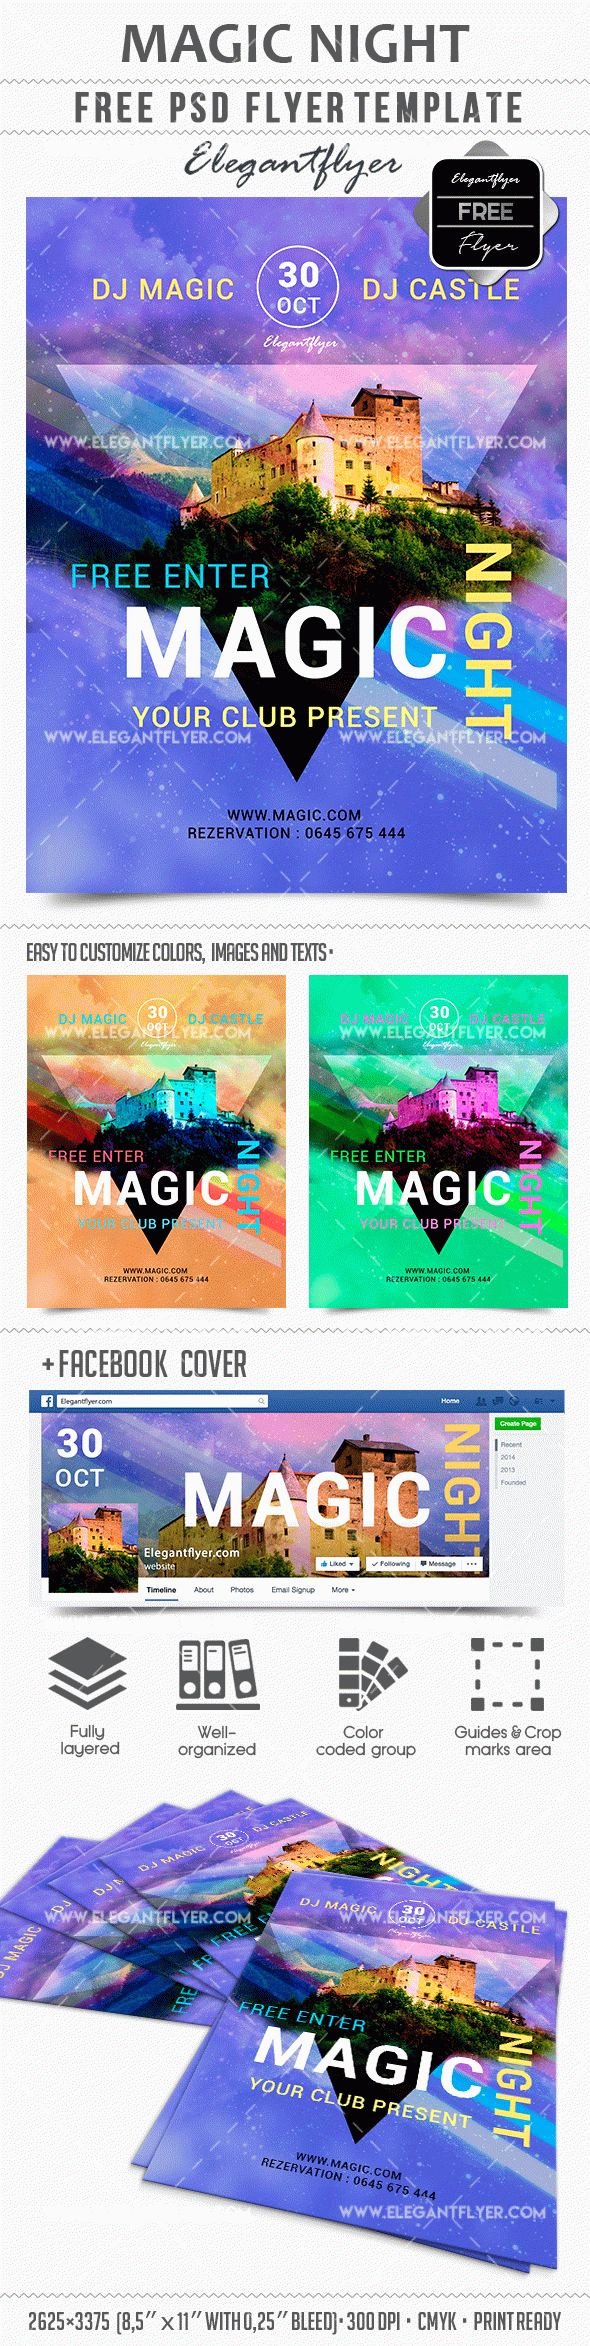 Free Download Flyer Template Magic Night – Free Psd